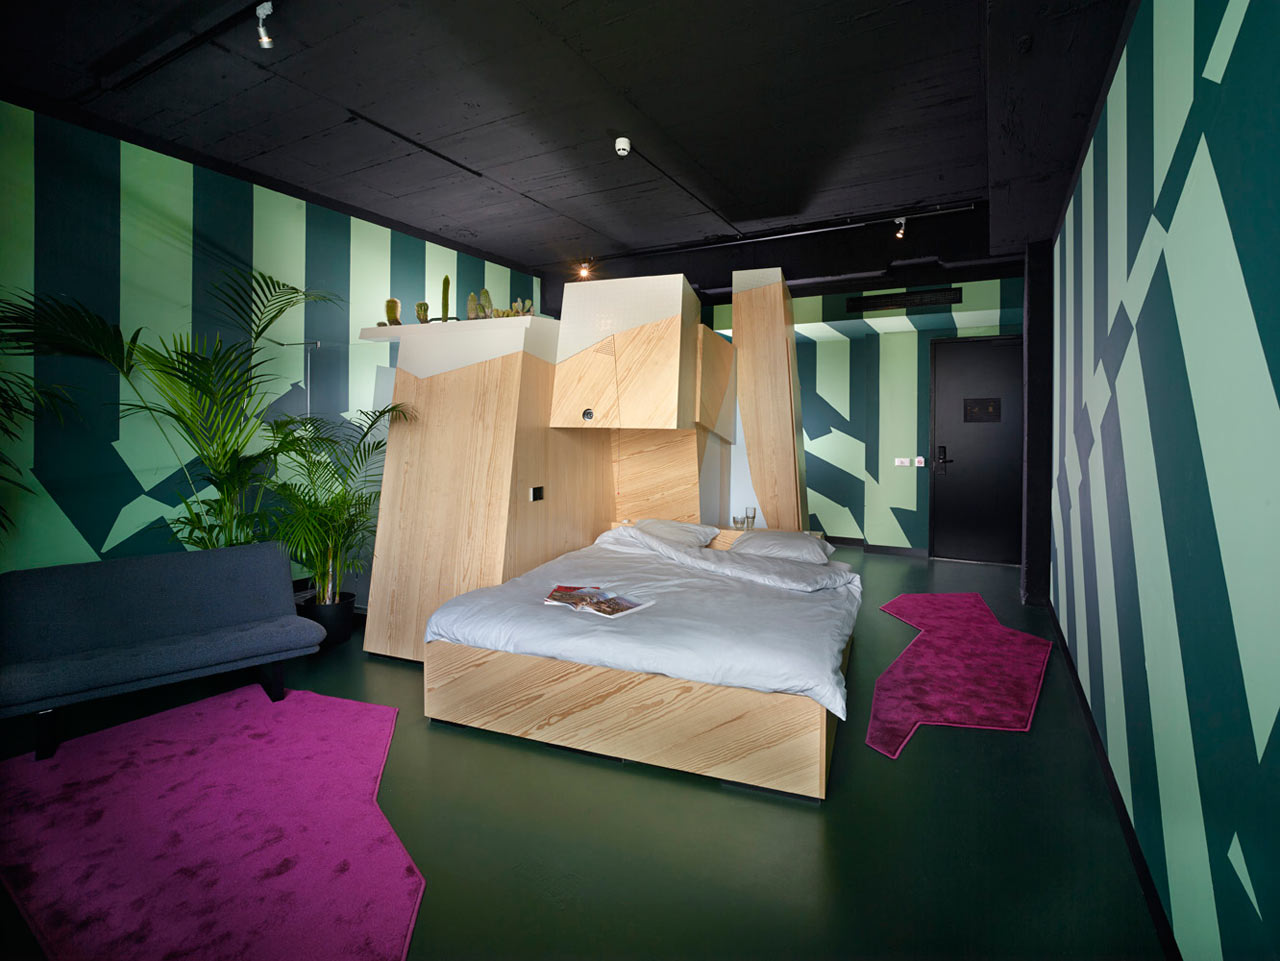 A One-of-a-Kind Hotel Room at Volkshotel Amsterdam